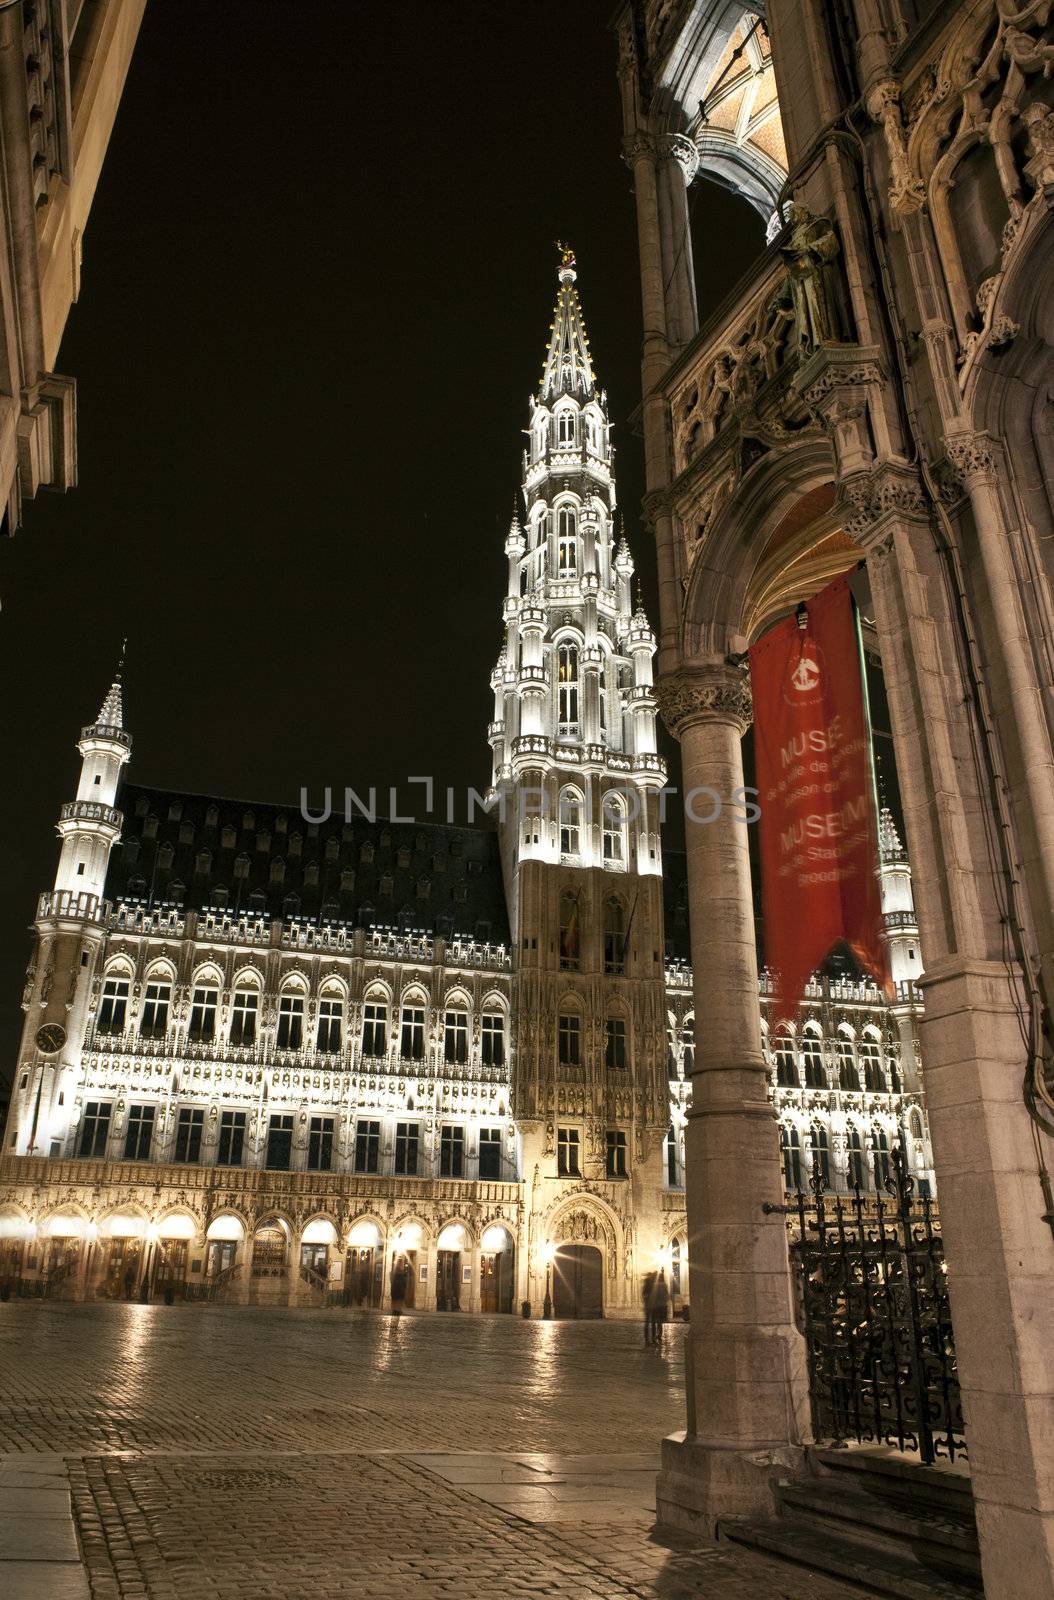 View of Grand Place and City Hall from behind the Museum of the City of Brussels.